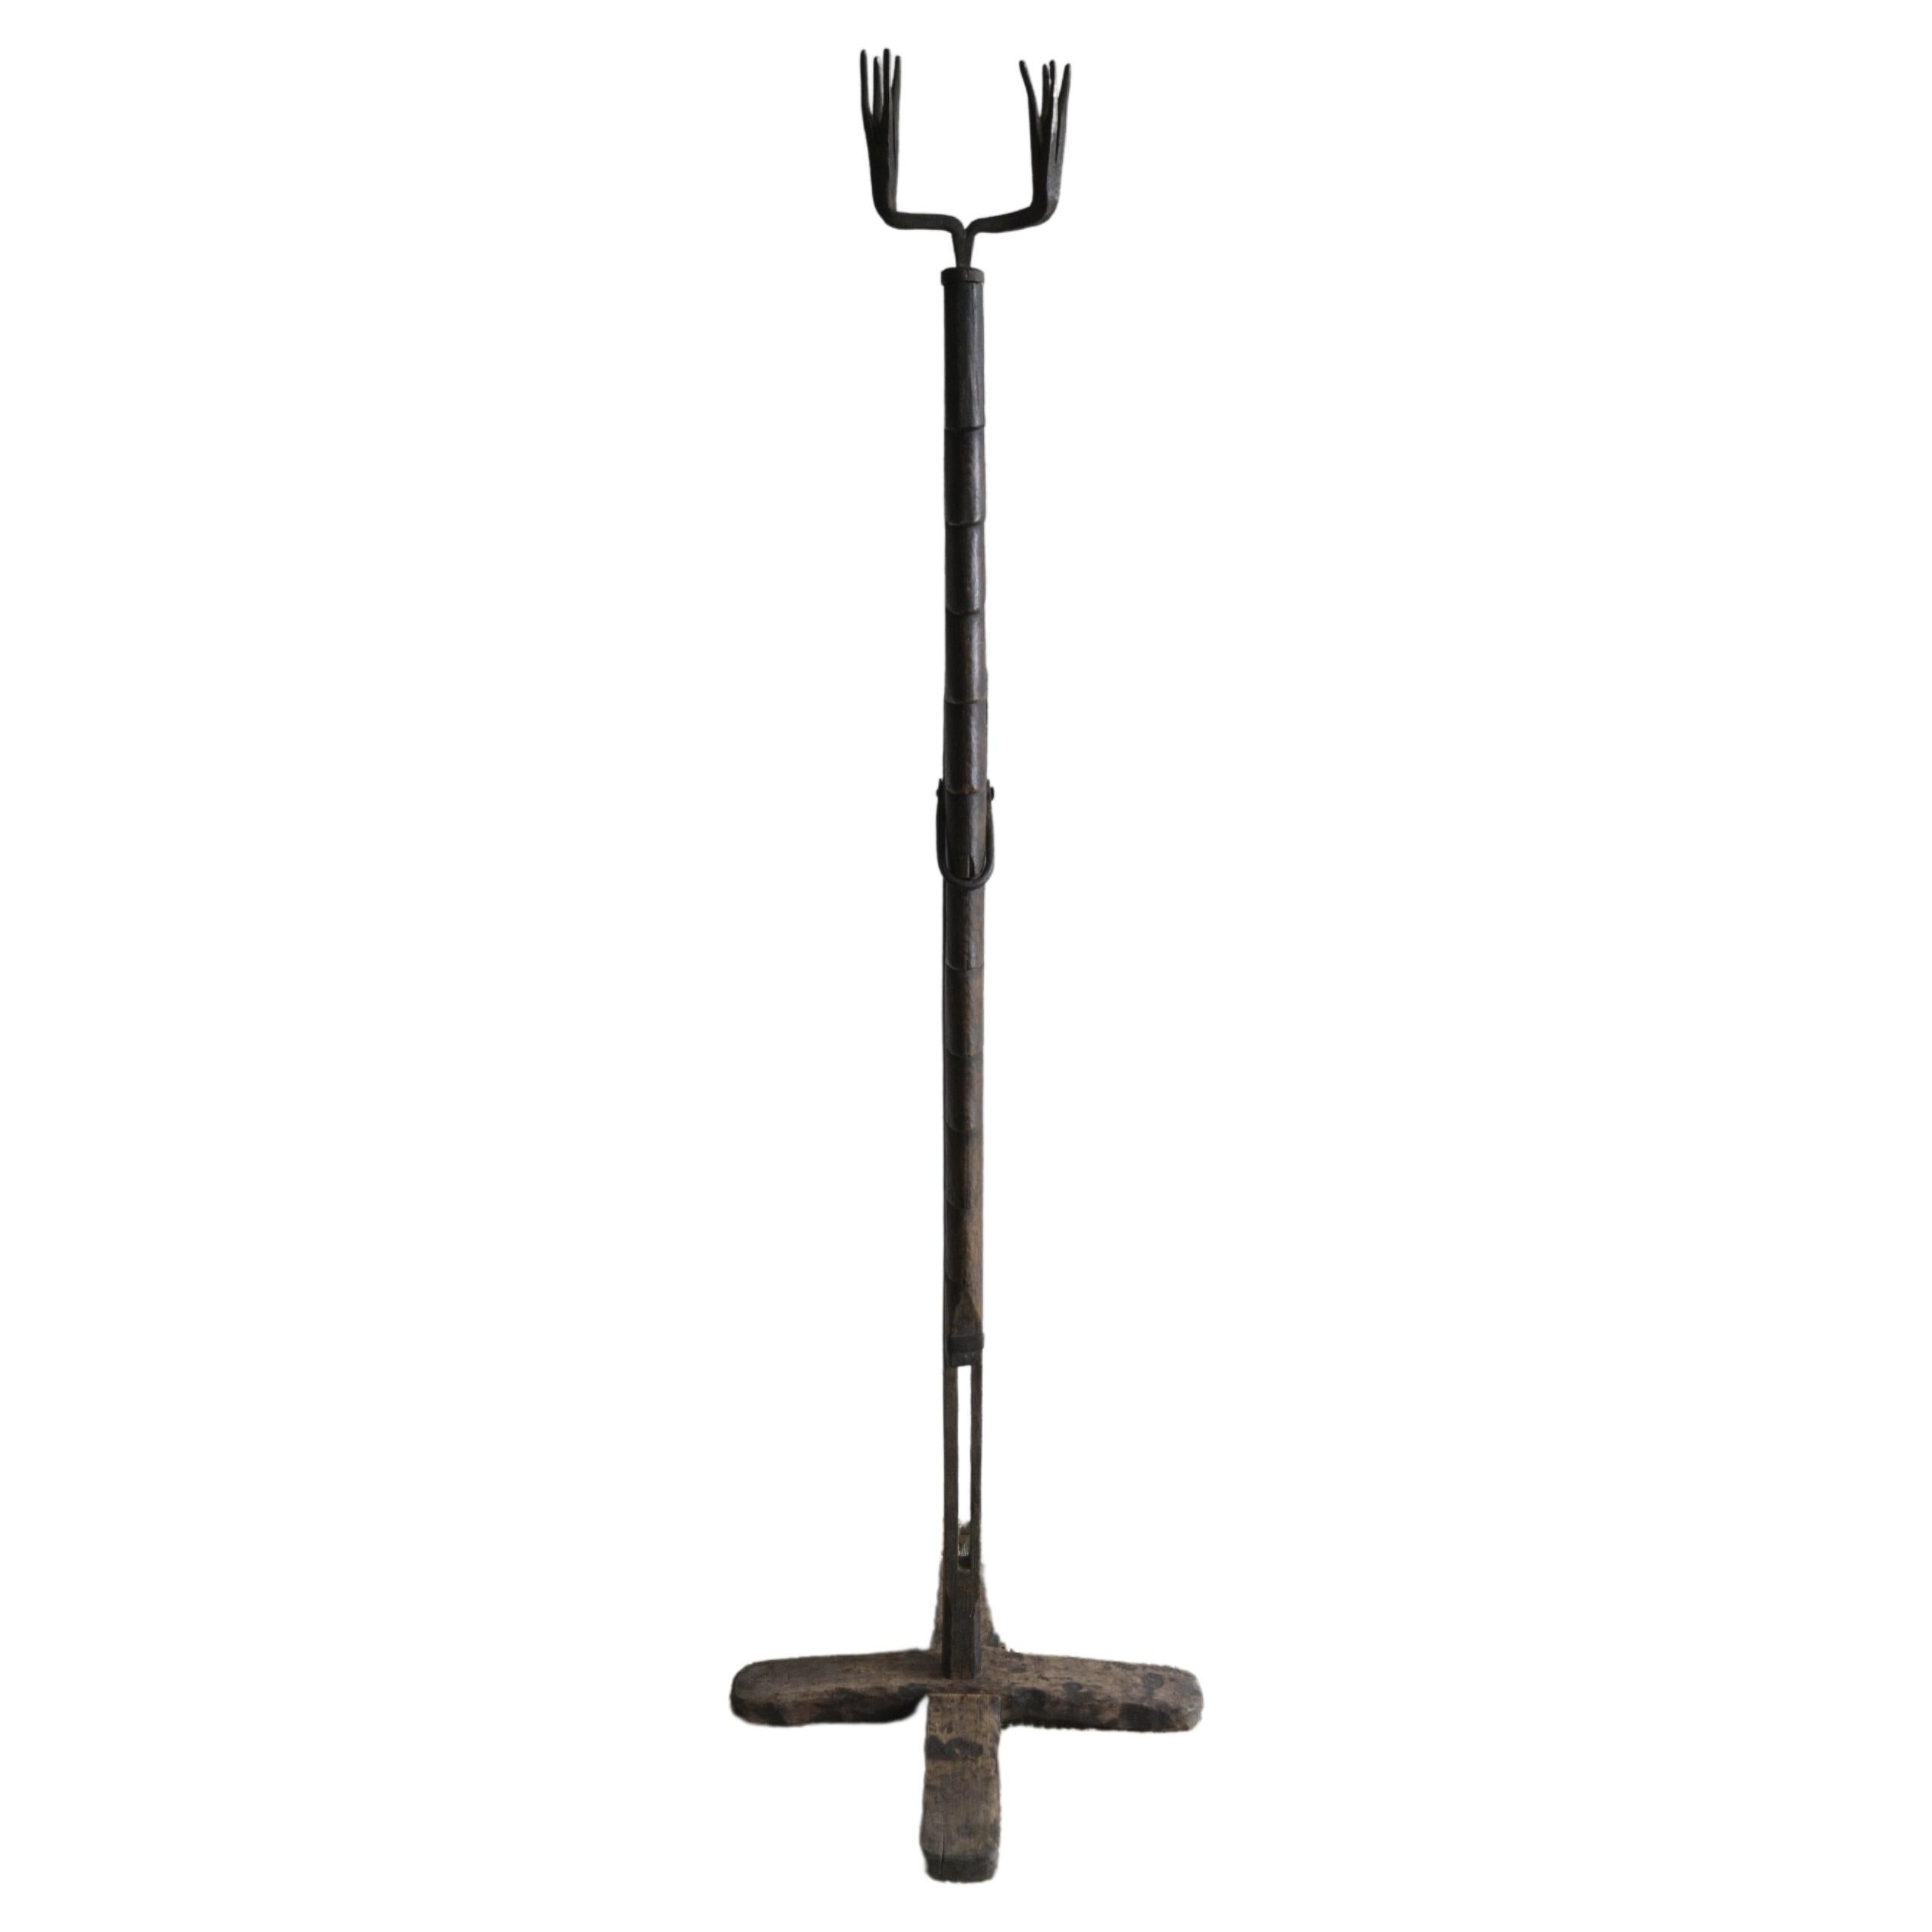 Swedish adjustable Floor Candlestick holder, also called 'Lyskärring'.
Circa 1780-1830.

The patina is really dark and has an almost mahogany feel to it.

This was originally not intended for candles; it was for birch sticks to be burnt and wedged